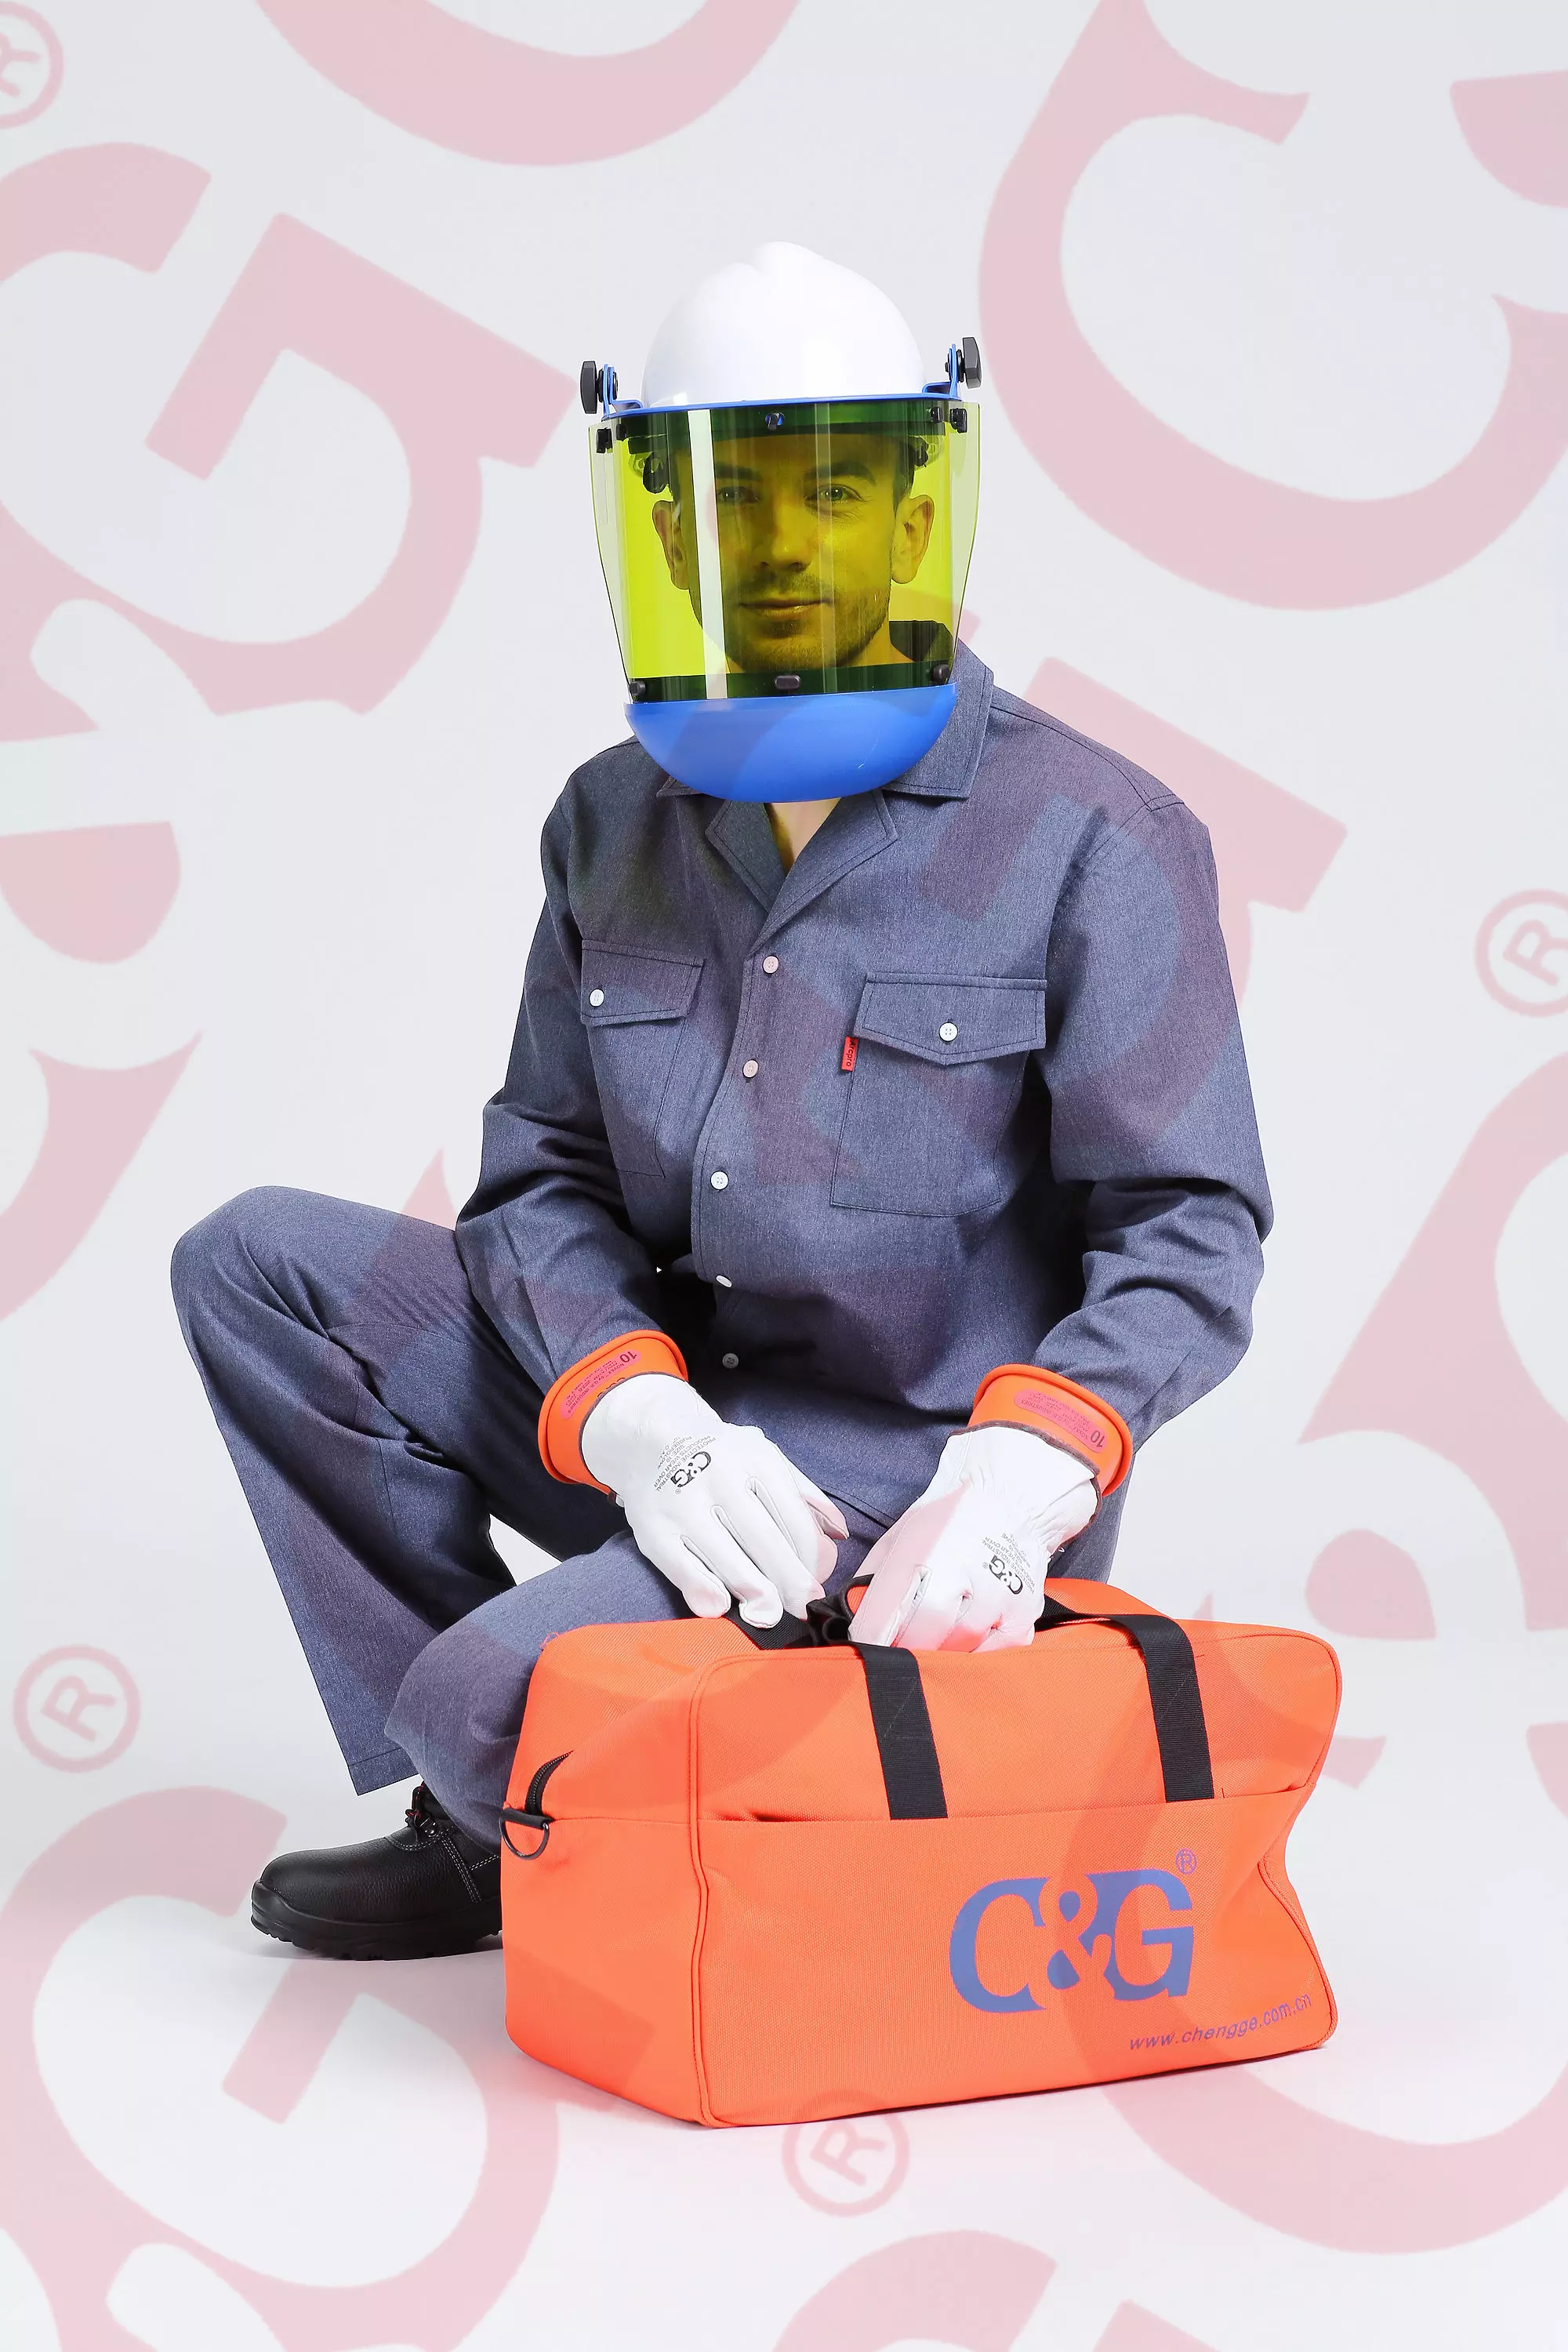 Purchasing Arc Flash Clothing - What do you need to pay attention?